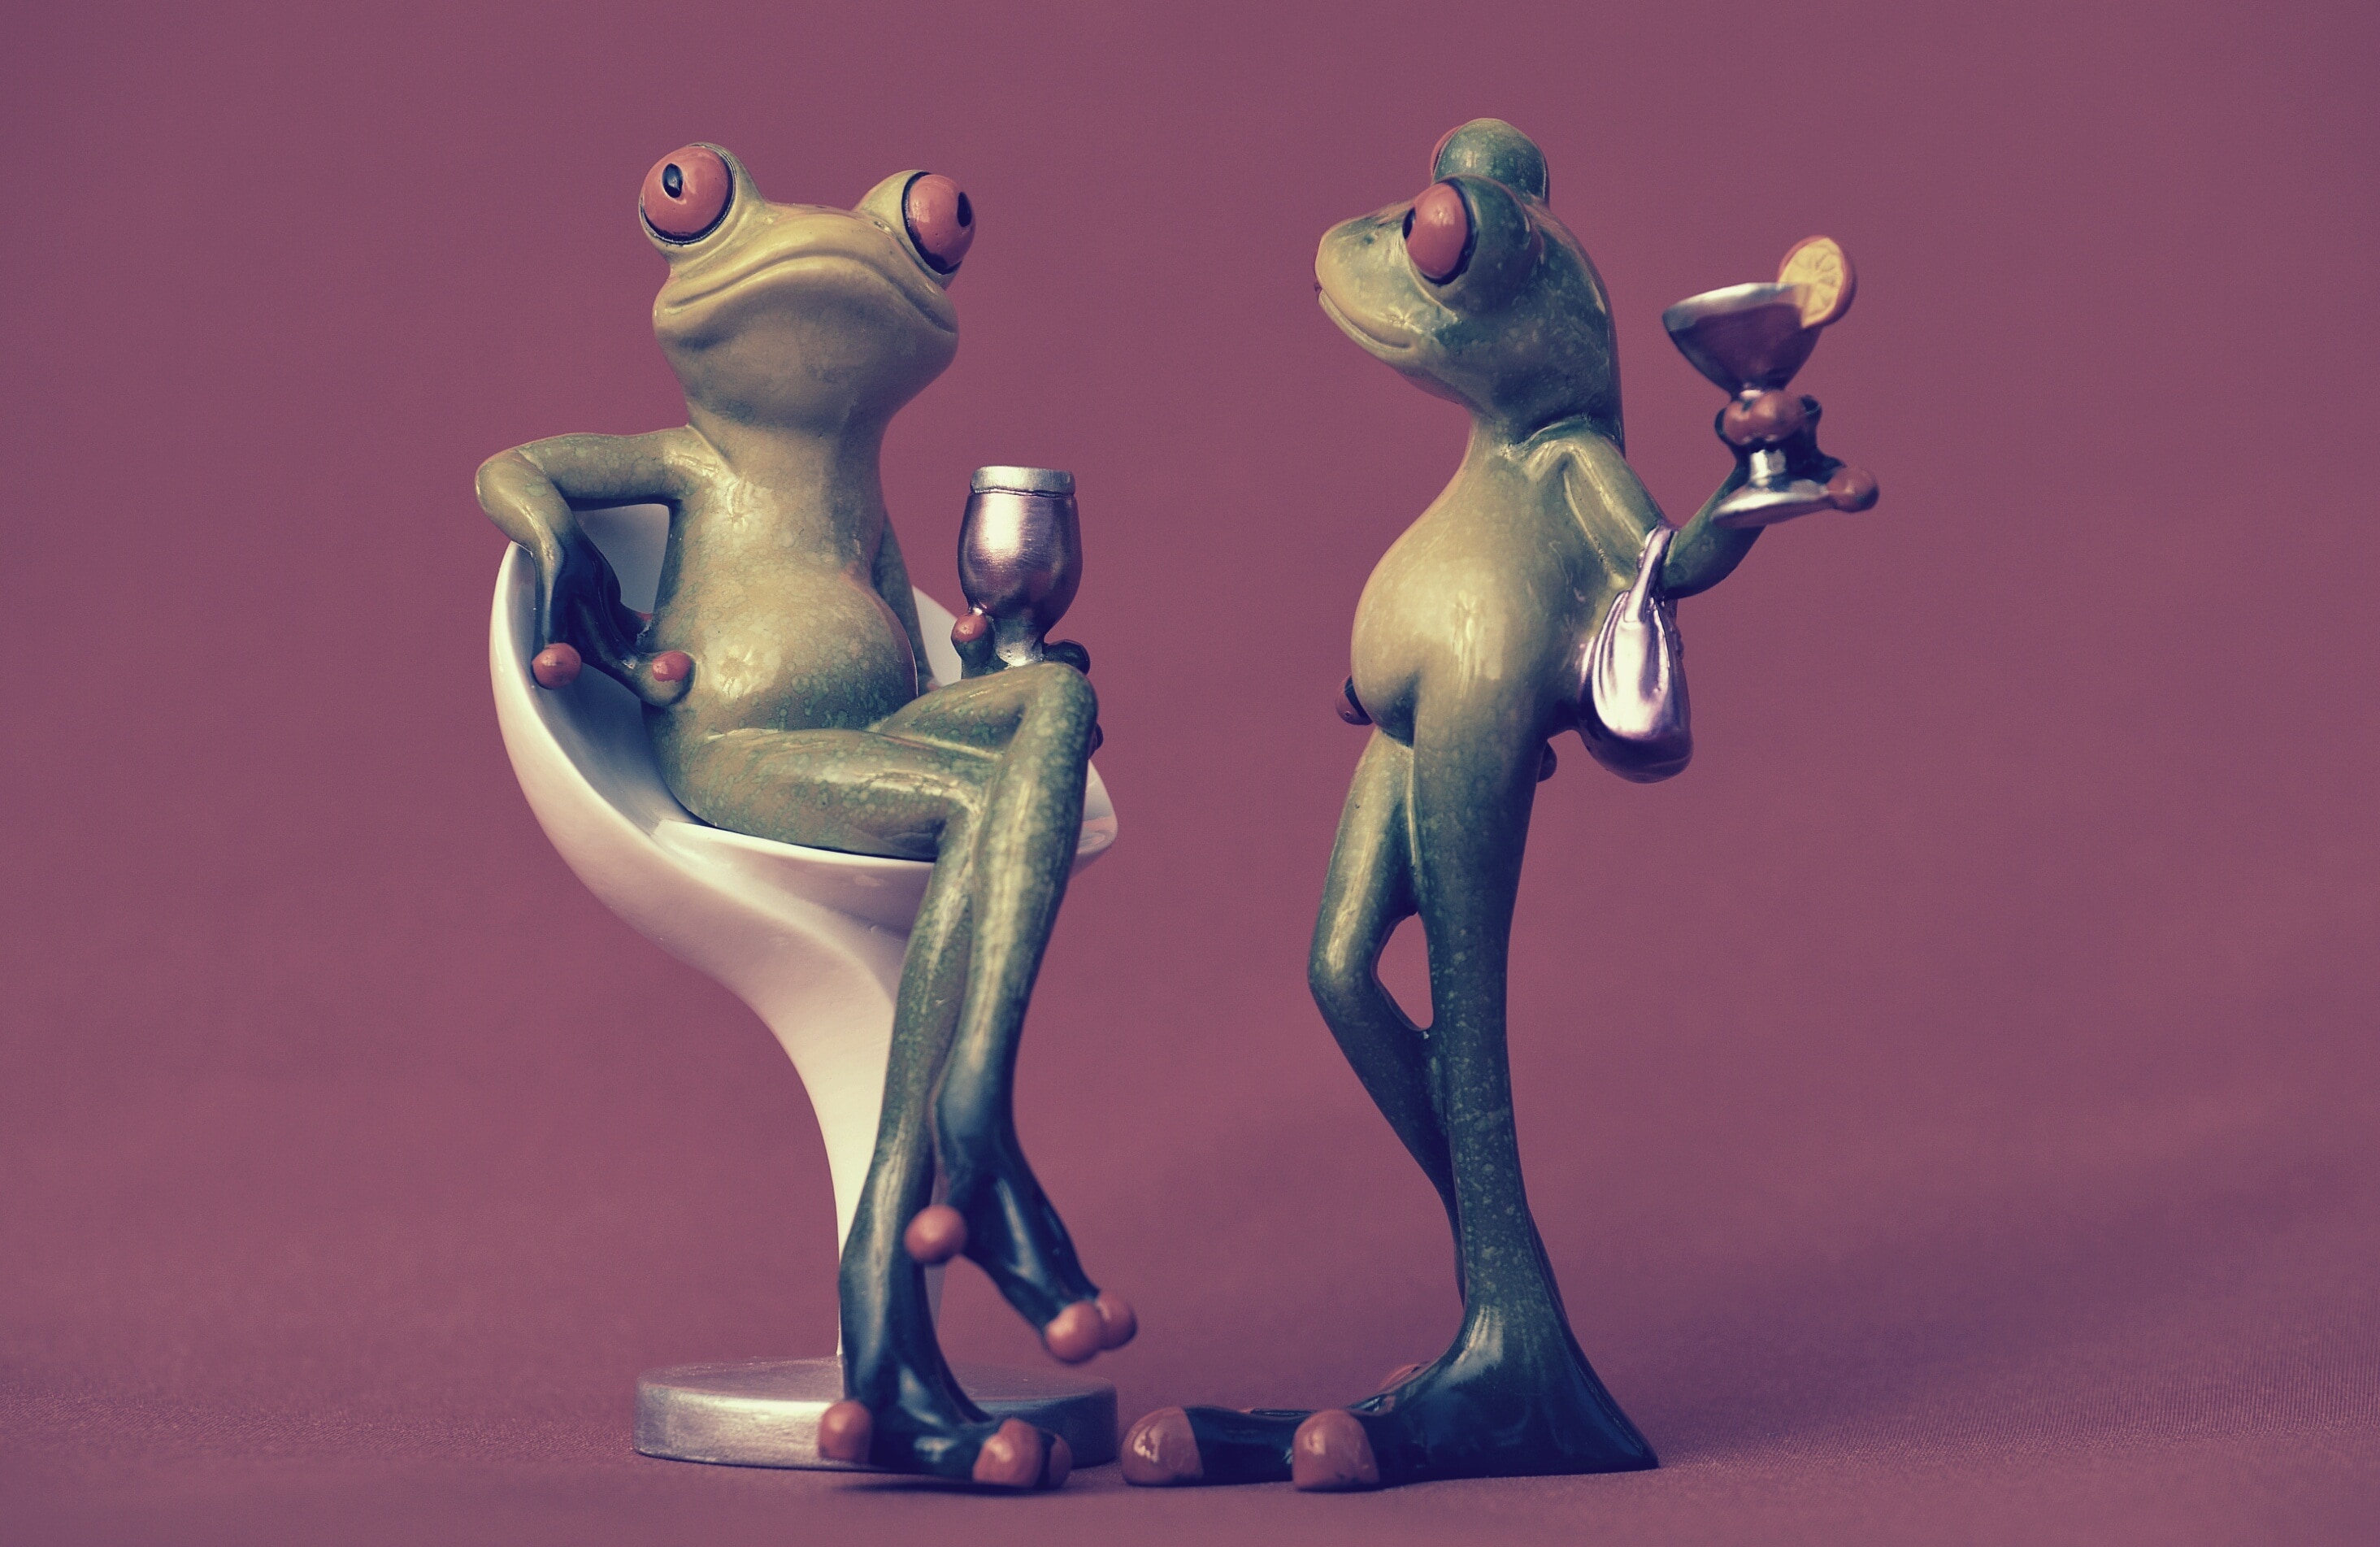 two green tree frogs holding a drinking glasses figurines